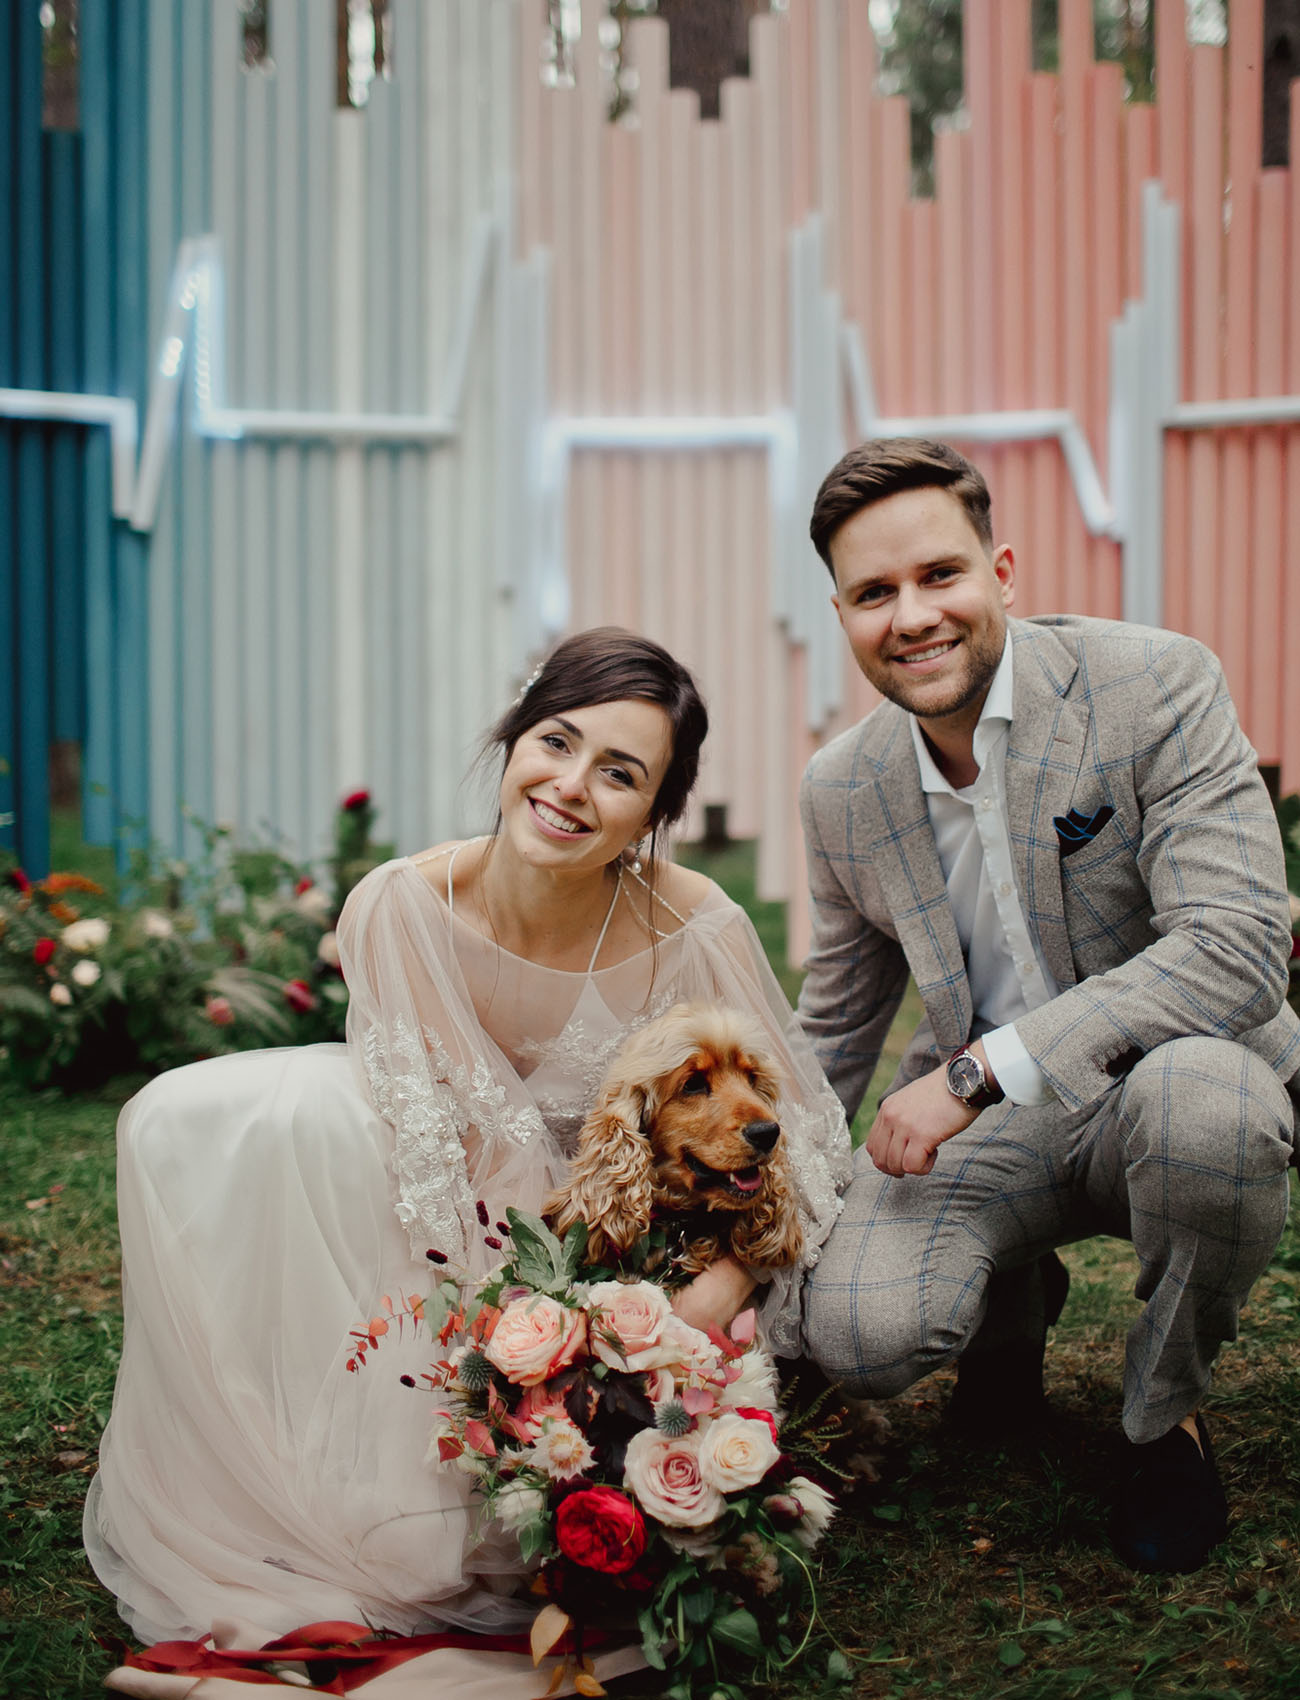 The couple's dog was participating in the wedding, too